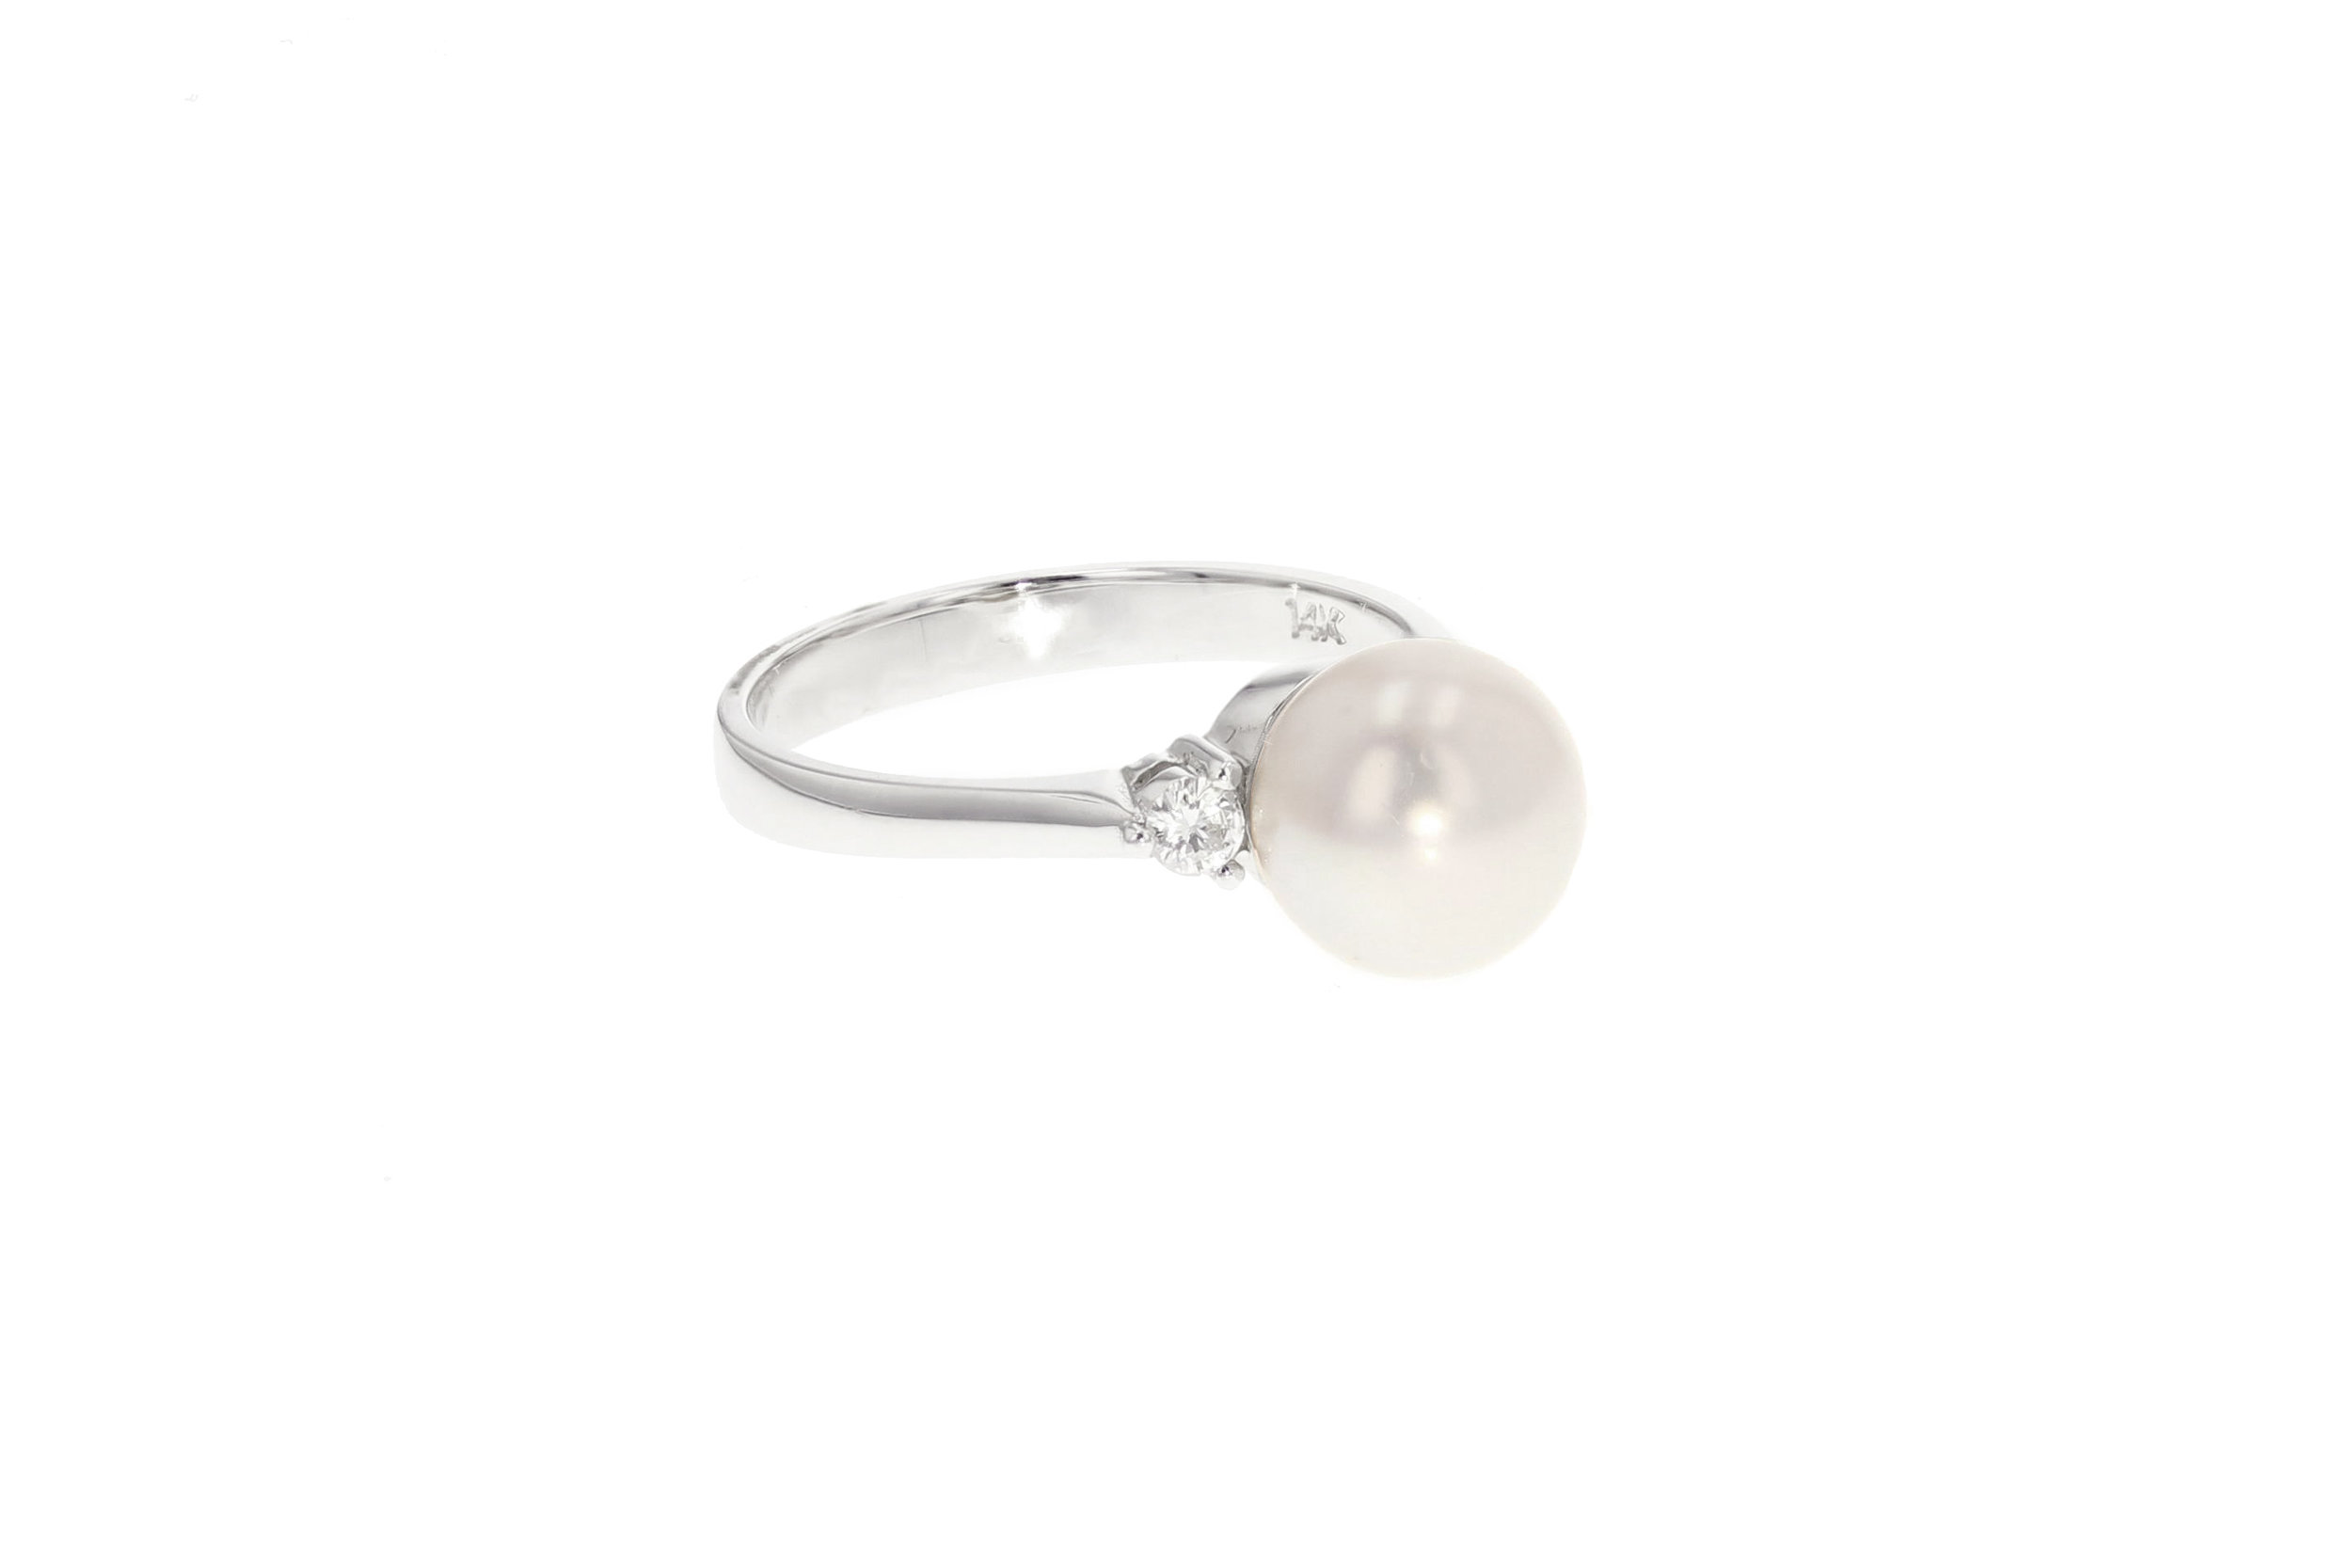 14k w/g Diamond and Pearl ring. $1420